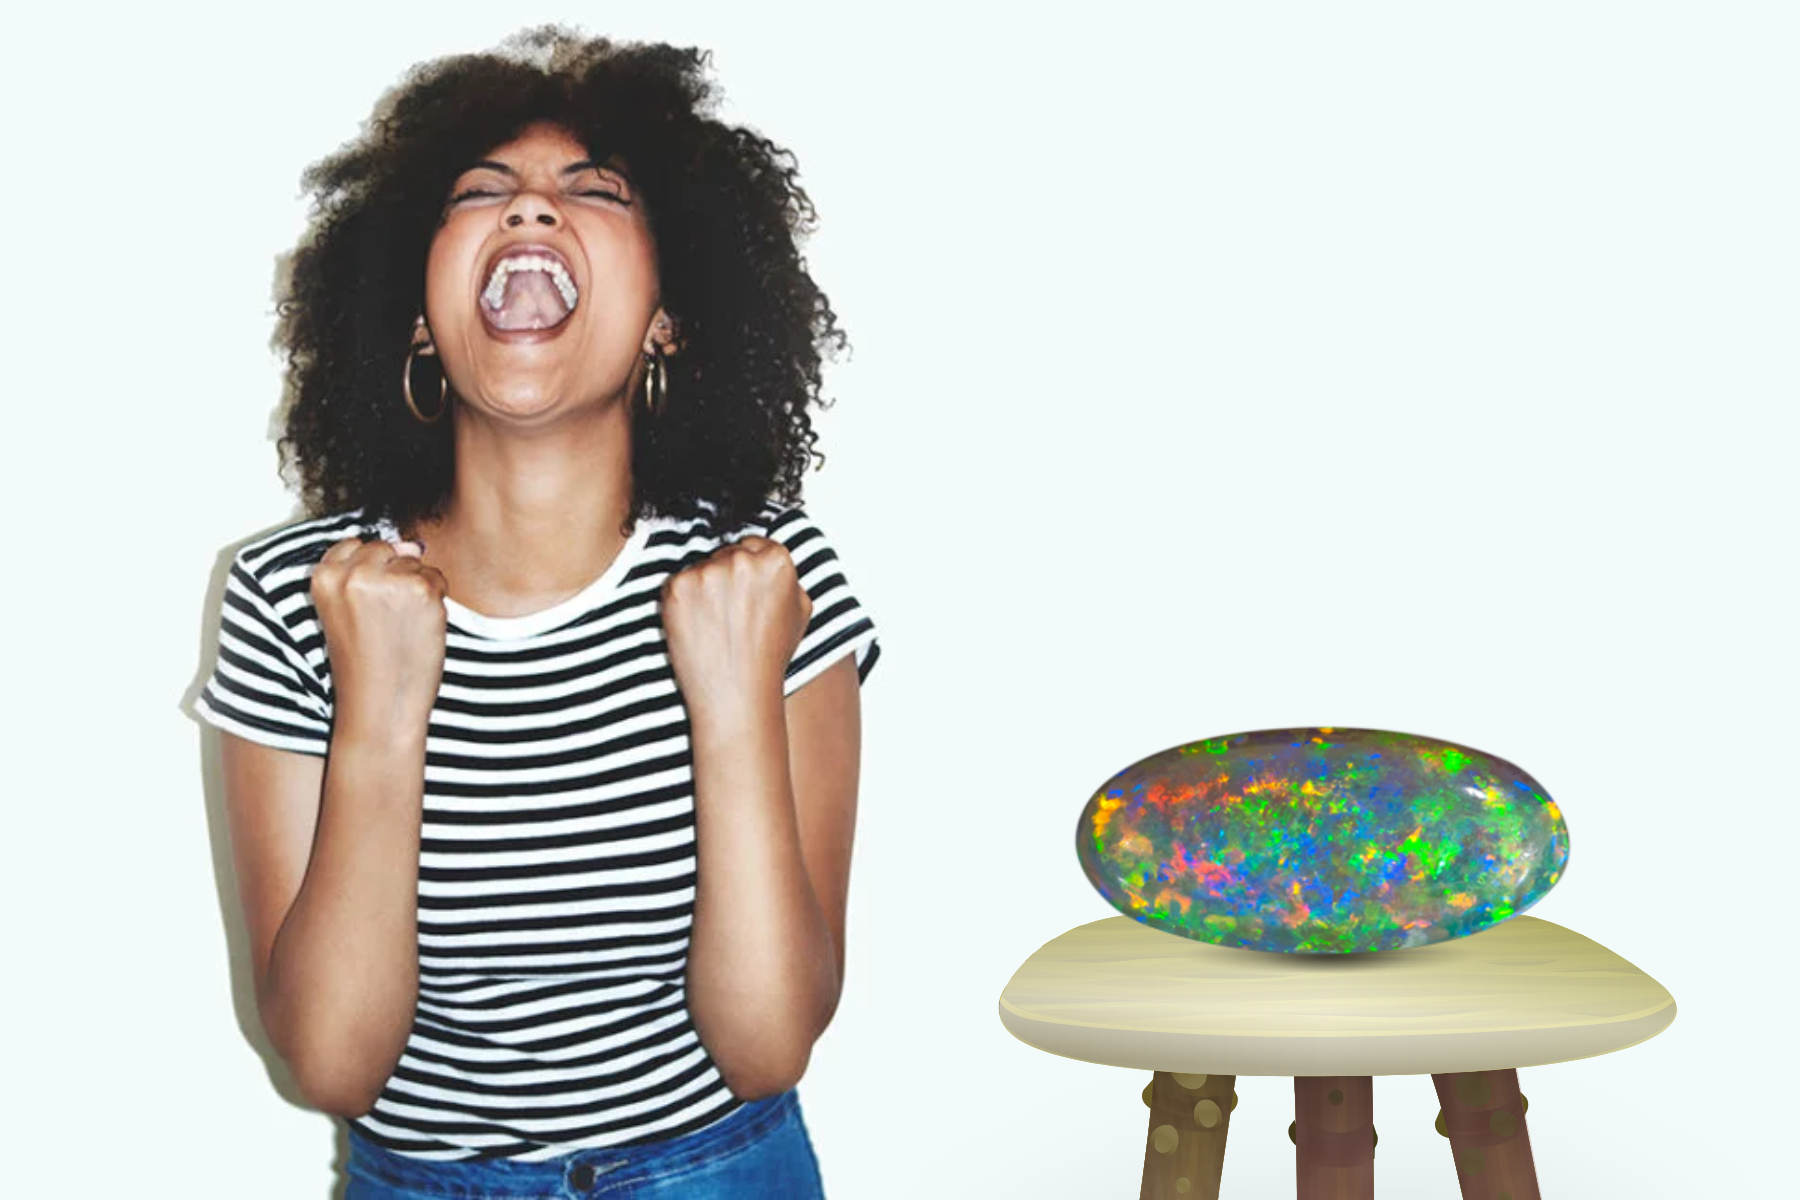 A joyful woman stands next to the opal in the stool